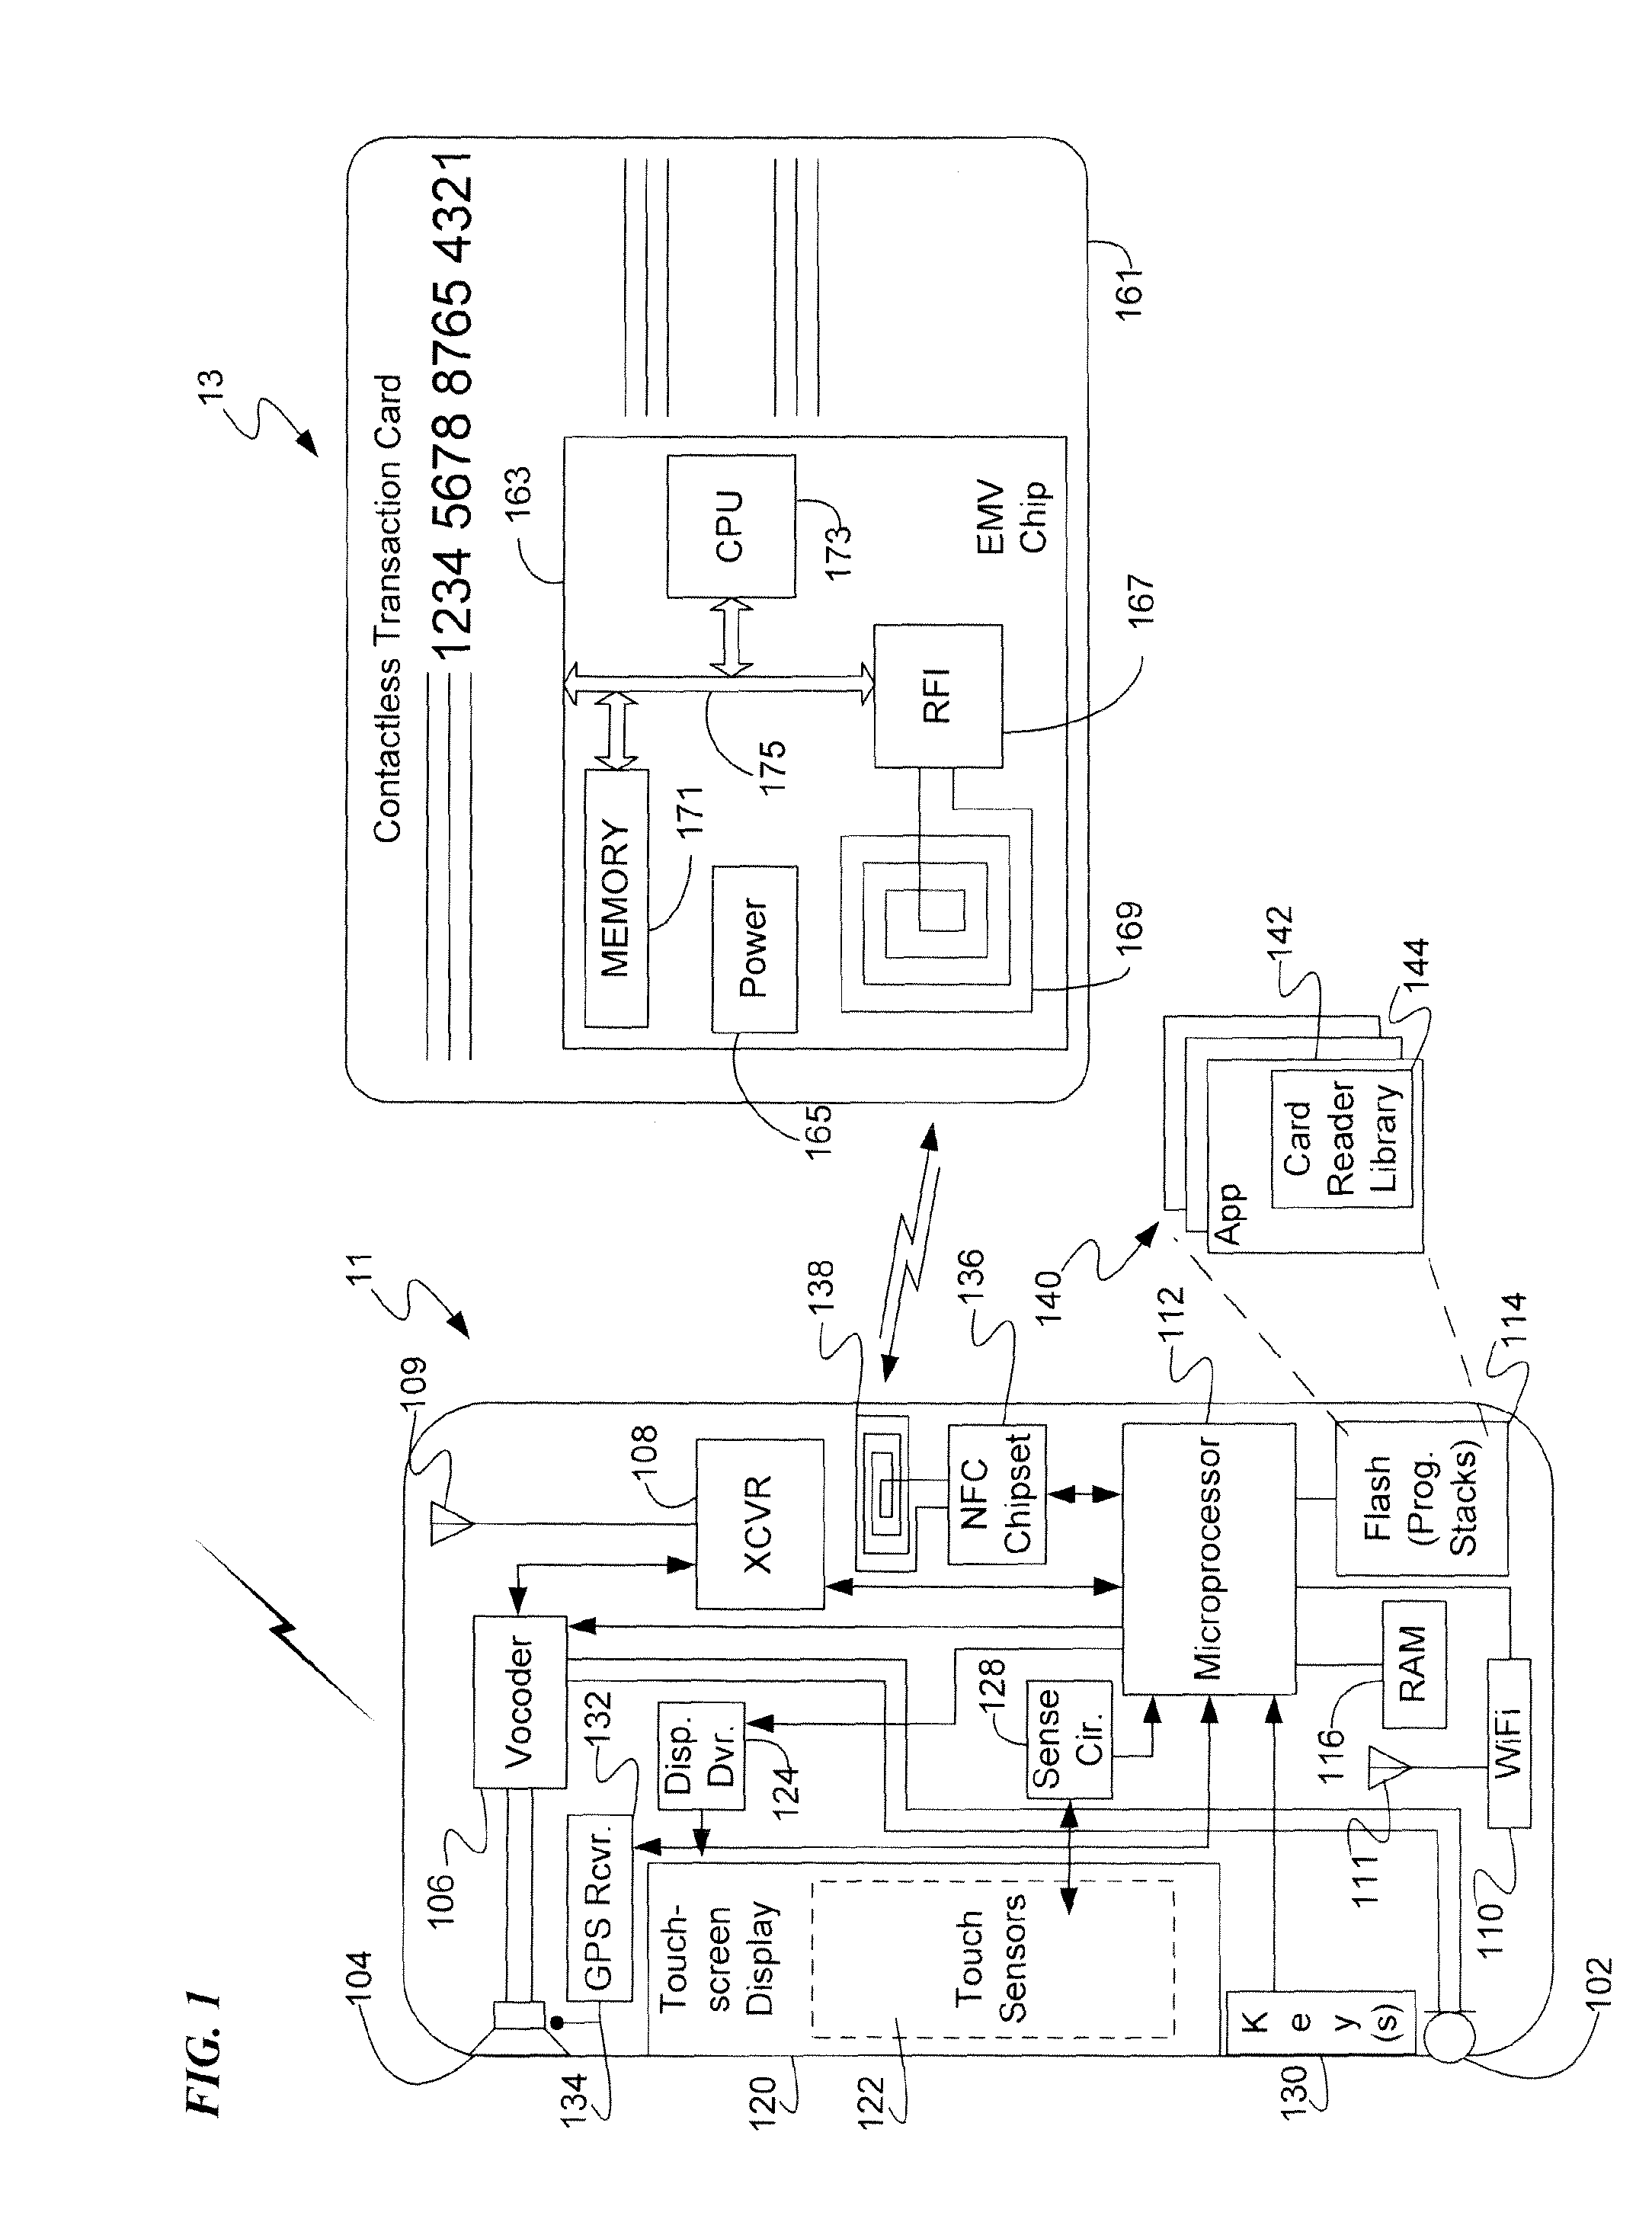 Payment or other transaction through mobile device using NFC to access a contactless transaction card